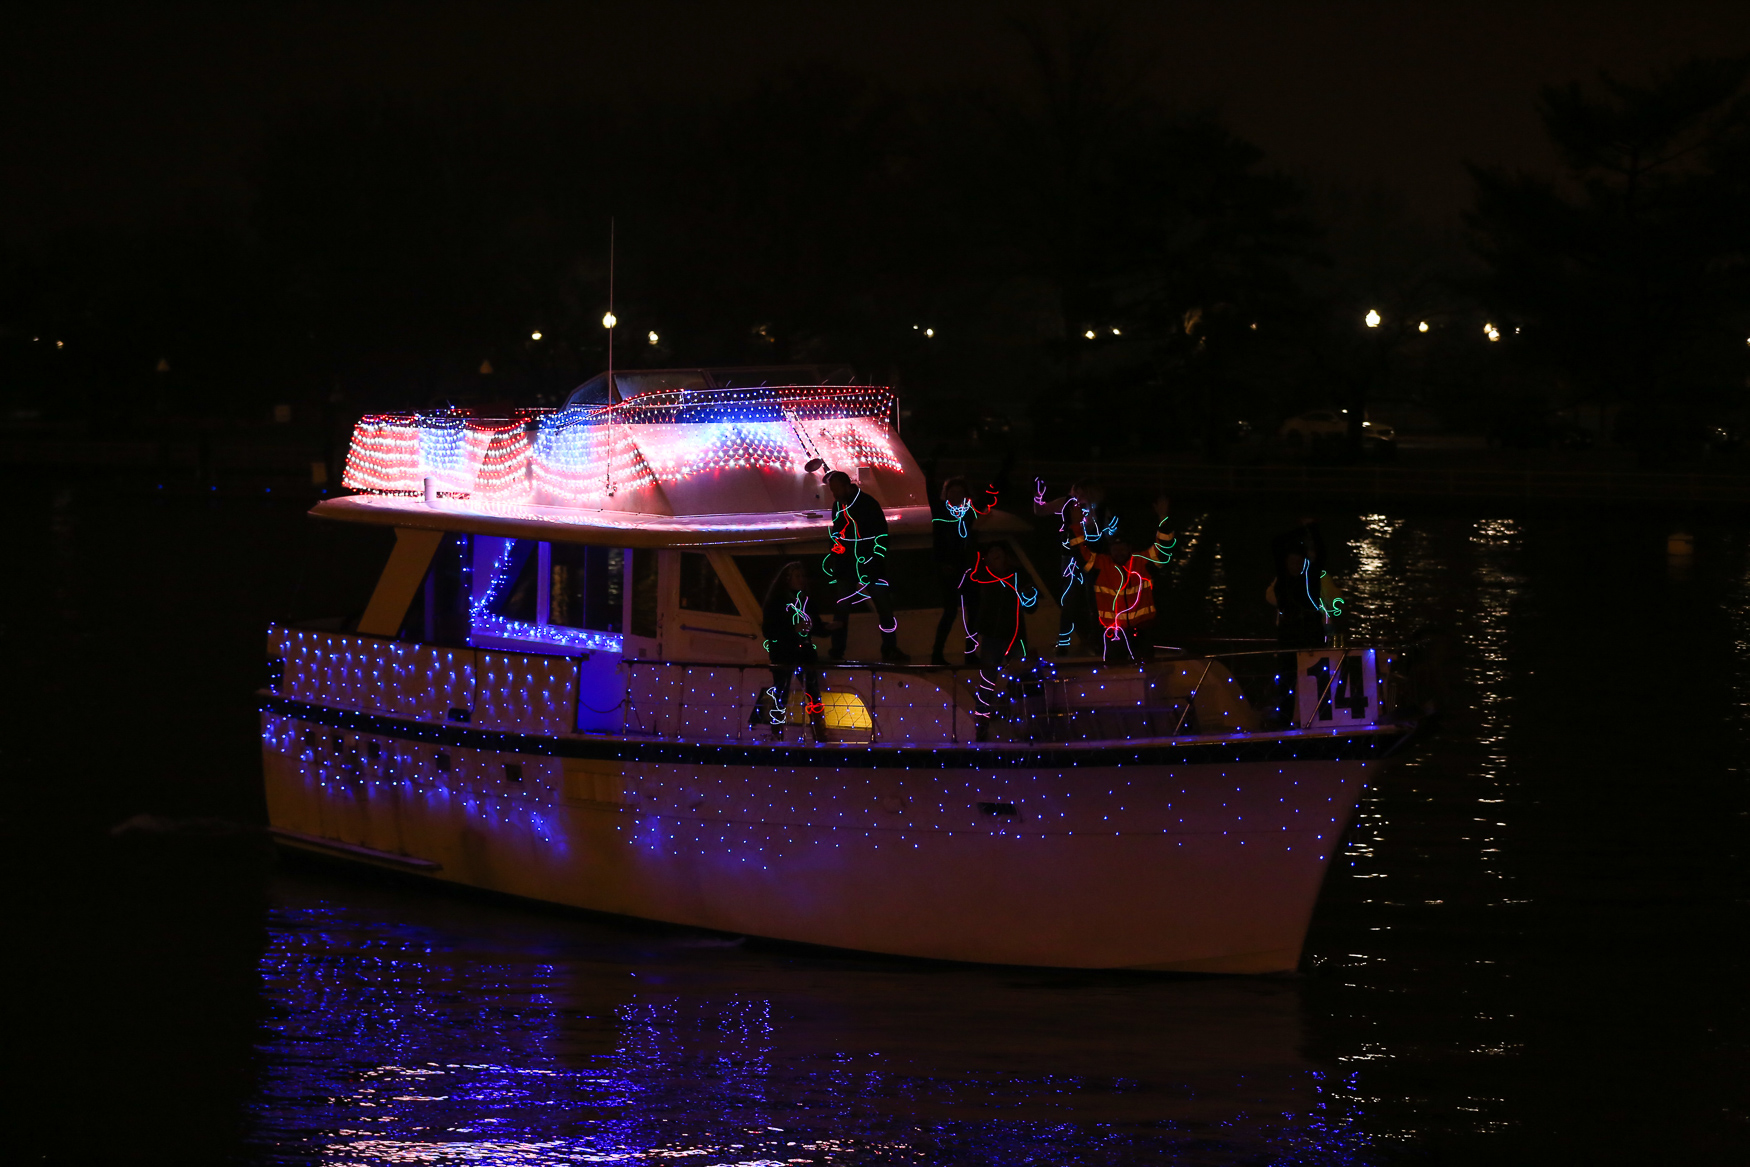 The Wharf's delightfully bright holiday boat parade in photos DC Refined